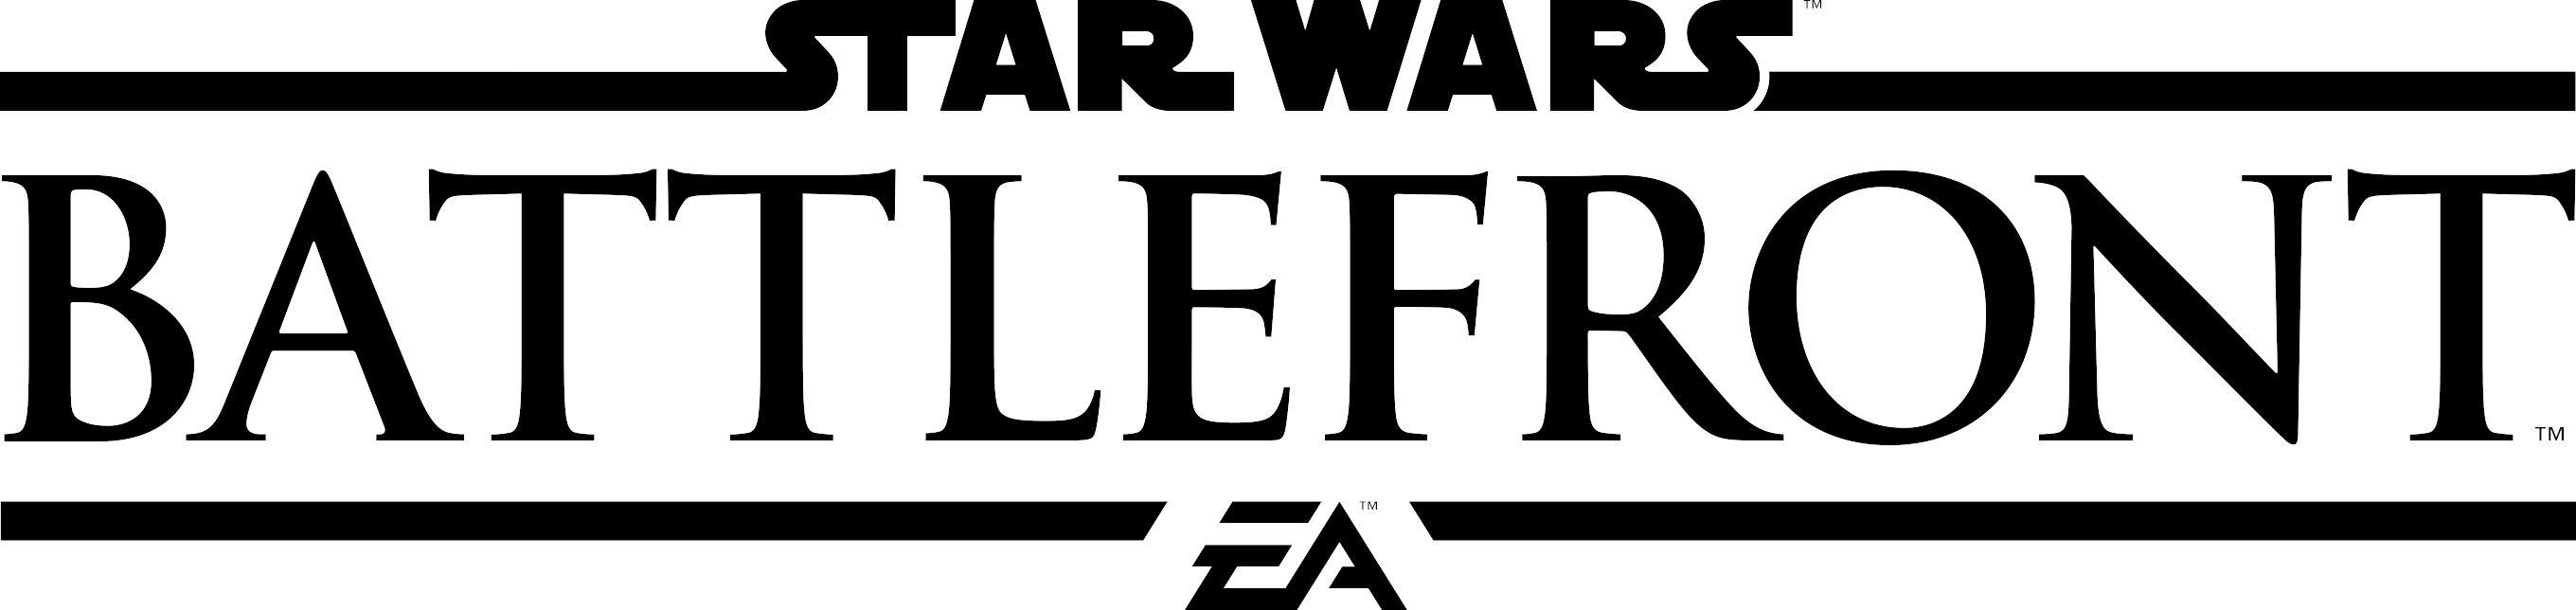 Battlefront Logo - Star Wars Battlefront Beta: Disappointingly Average - May Contain ...